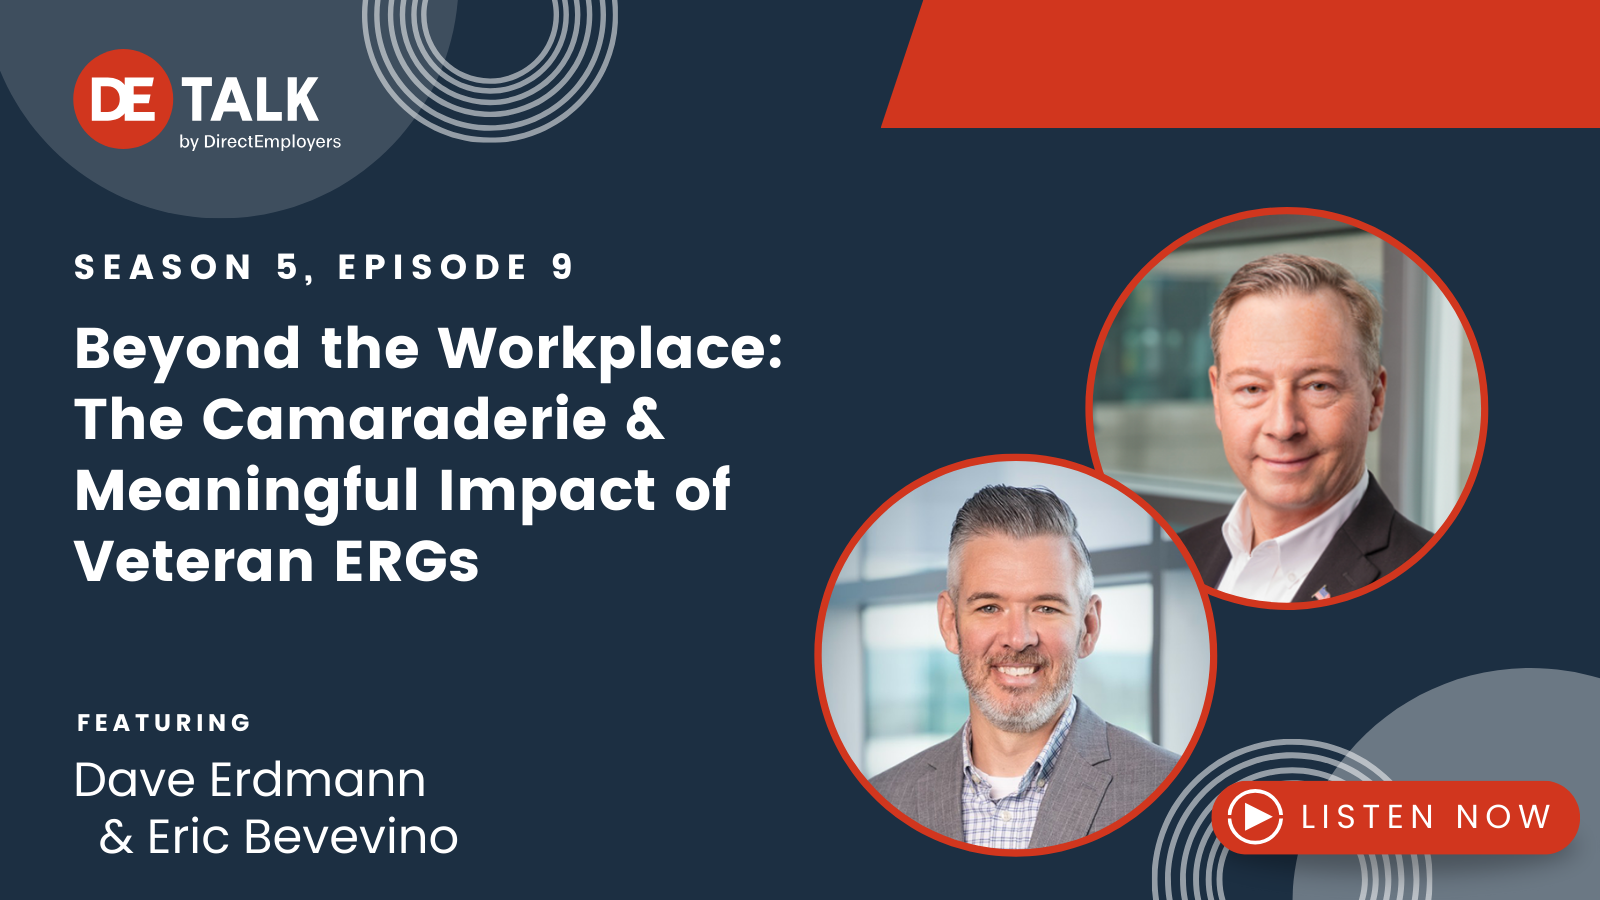 DE Talk S5E9 Beyond the Workplace: The Camaraderie & Meaningful Impact of Veteran ERGs